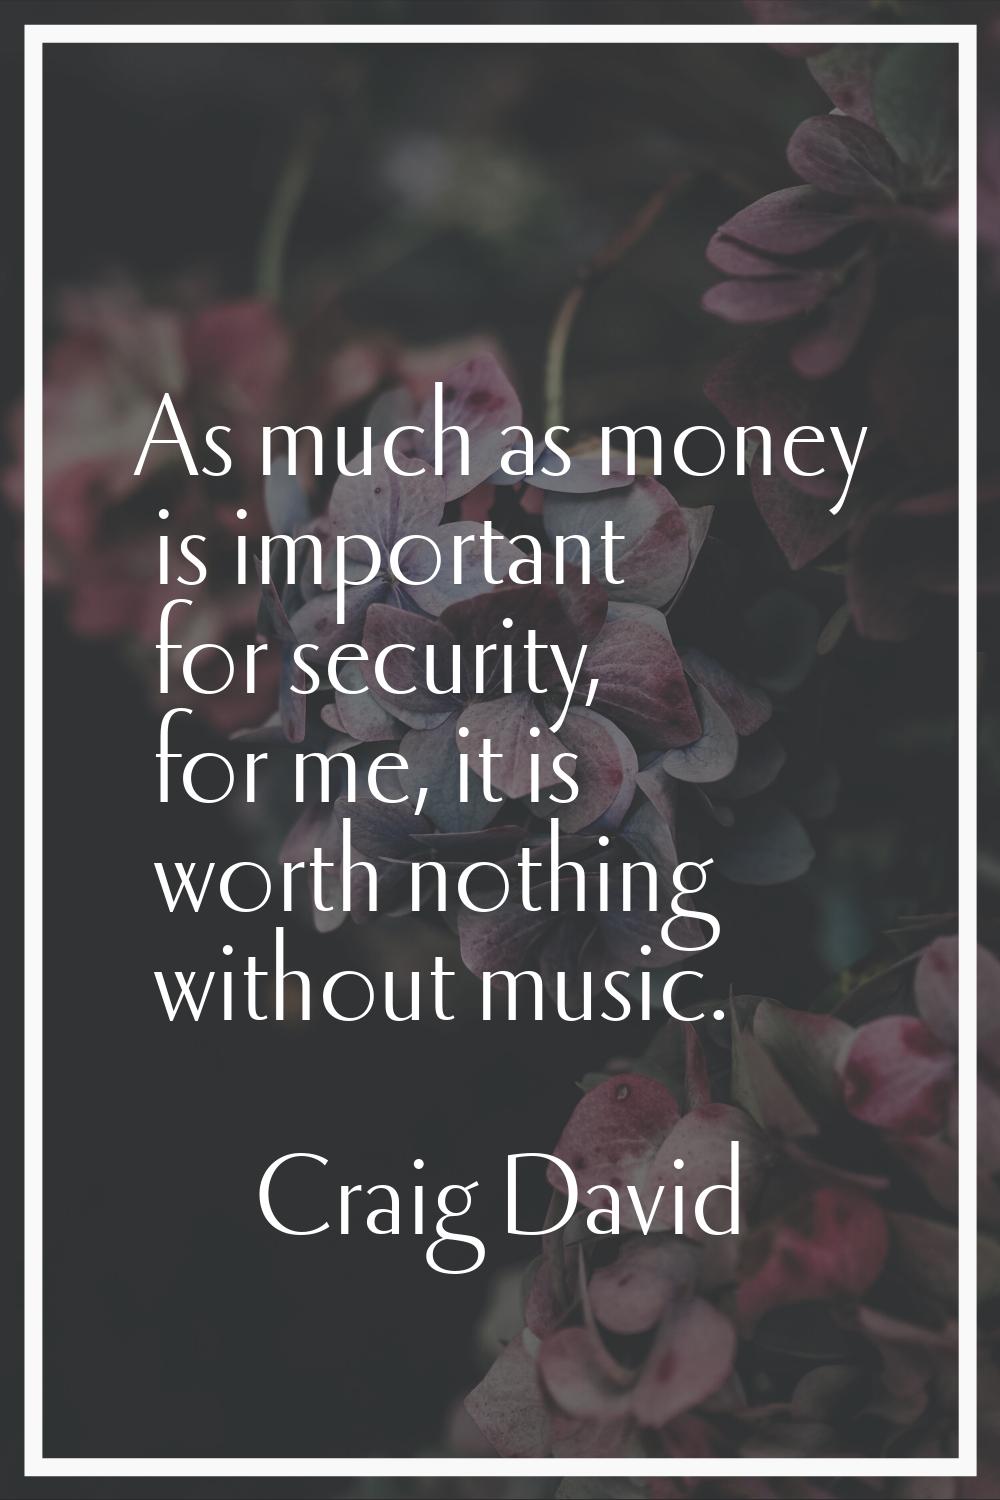 As much as money is important for security, for me, it is worth nothing without music.